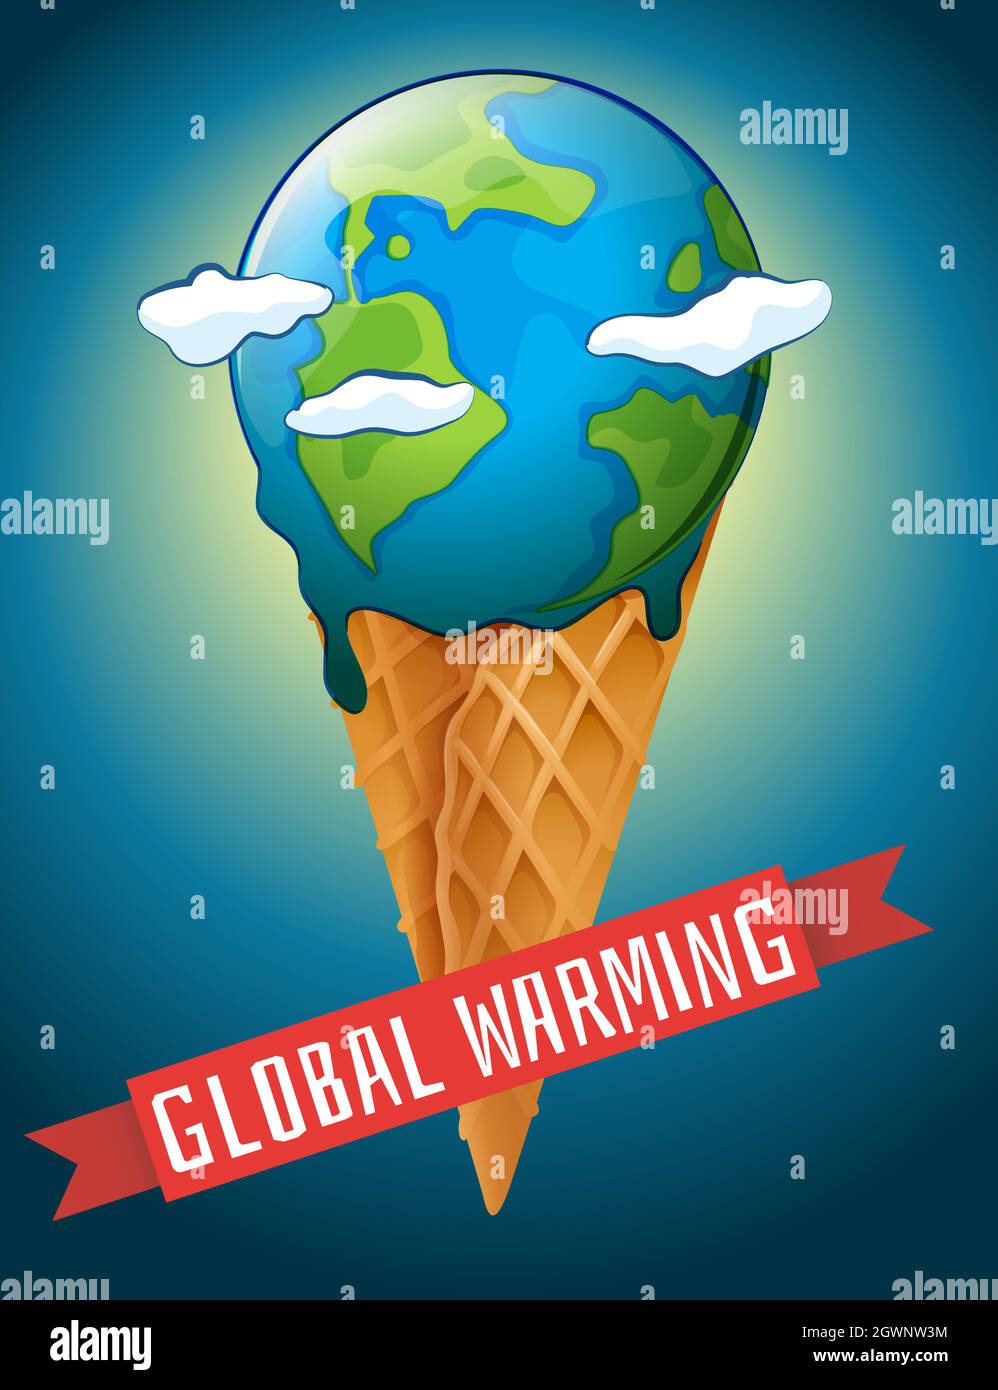 Global warming poster Stock Vector Images - Alamy